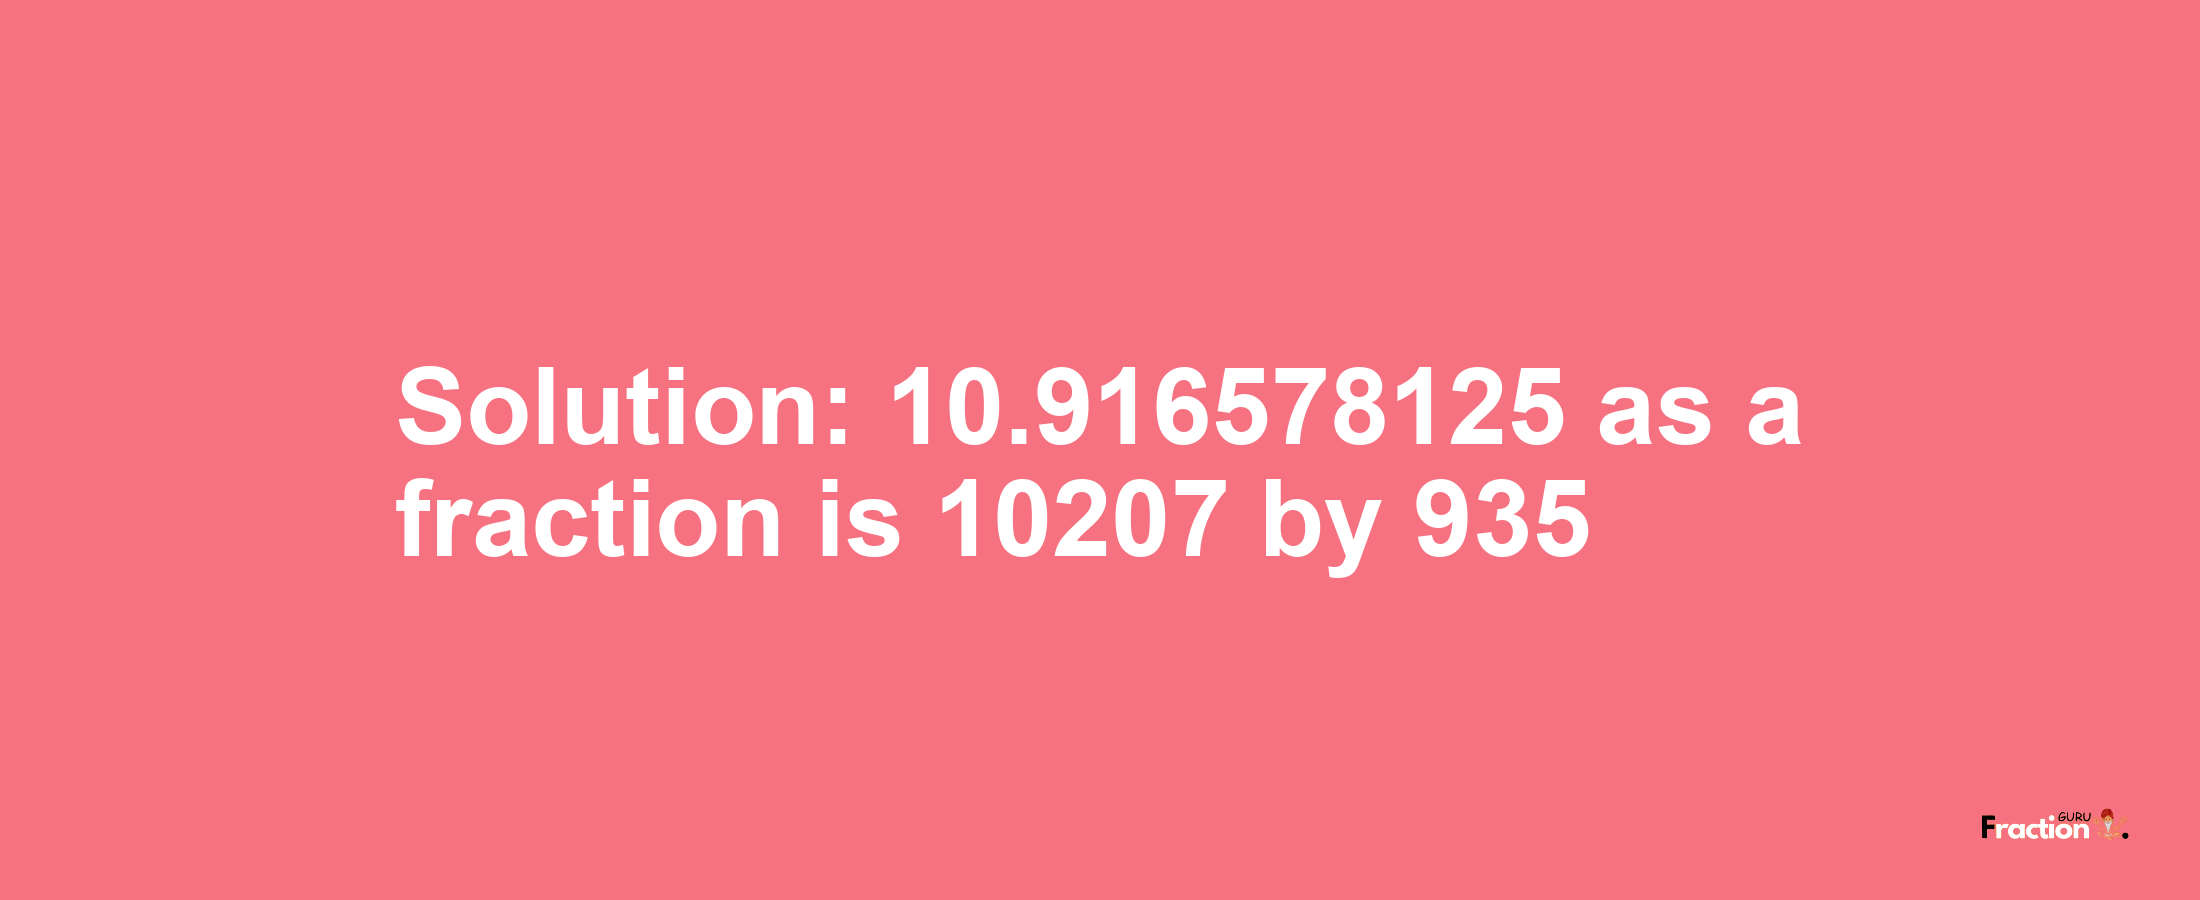 Solution:10.916578125 as a fraction is 10207/935